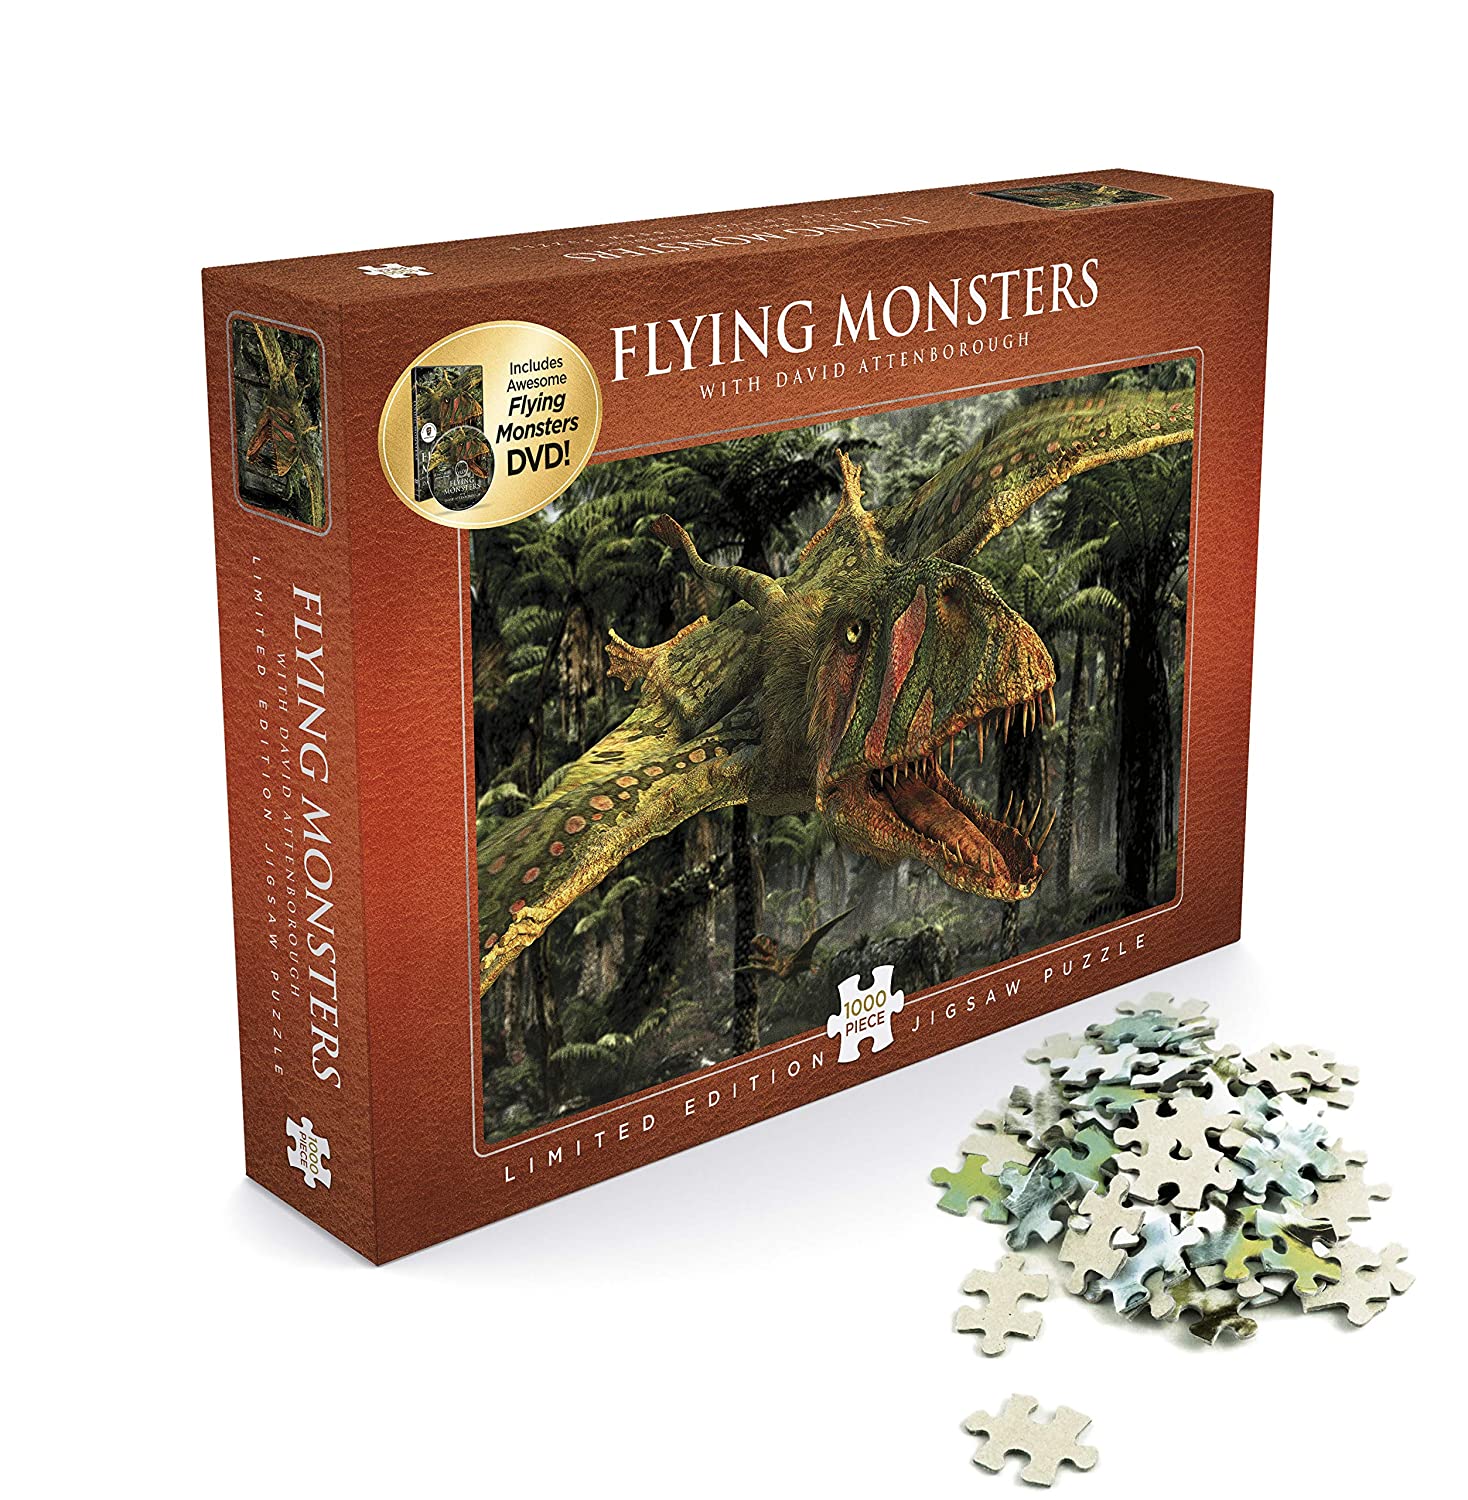 David Attenborough - Flying Monsters - Puzzle 1000 + DVD